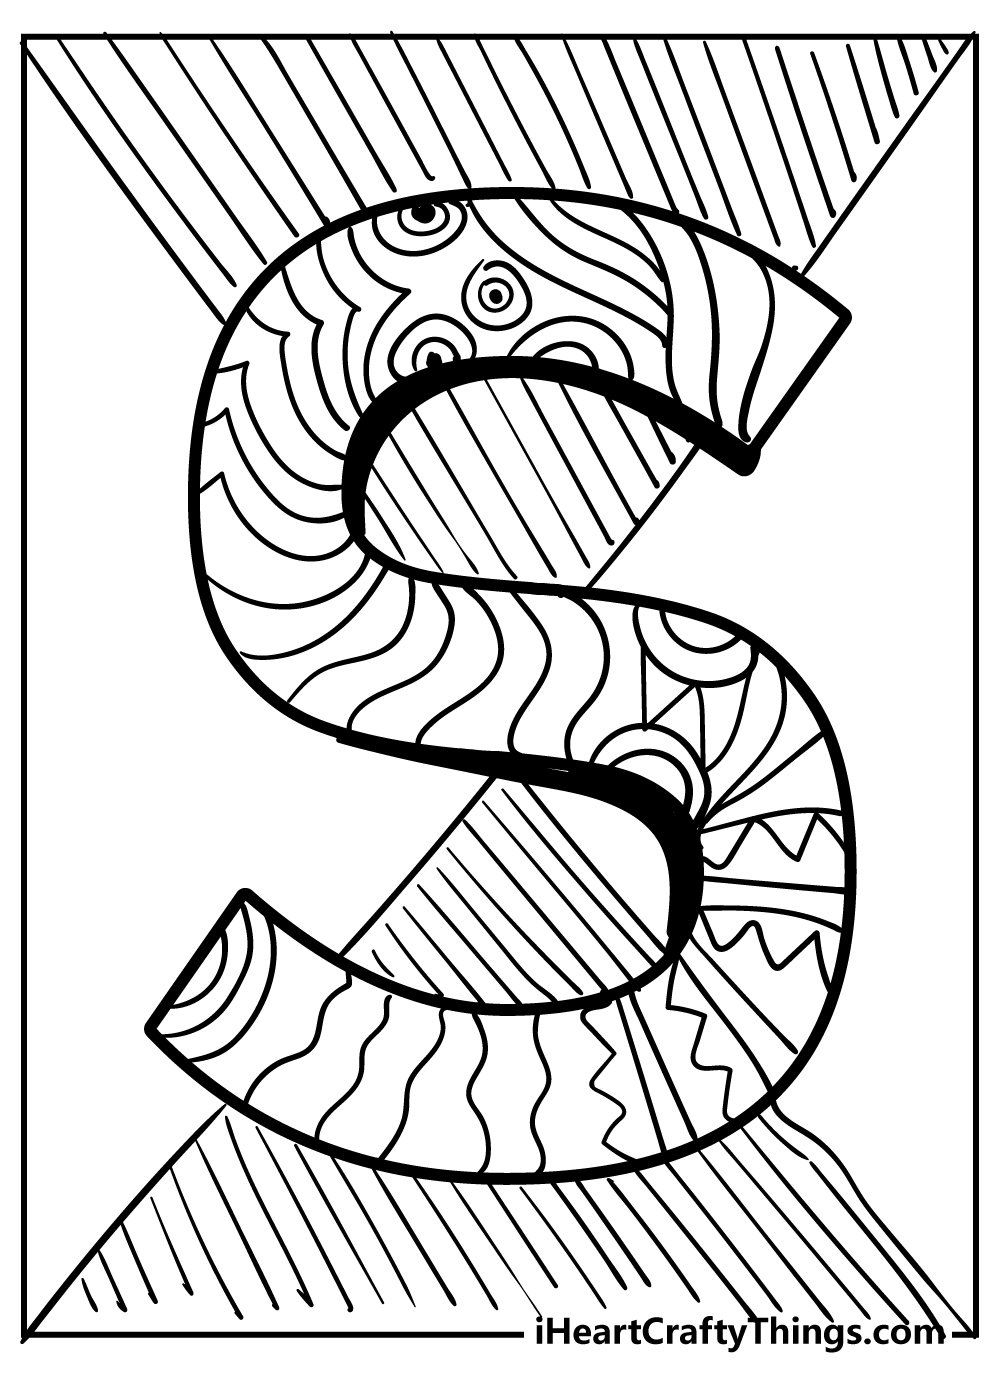 Letter S Coloring Book for adults free download